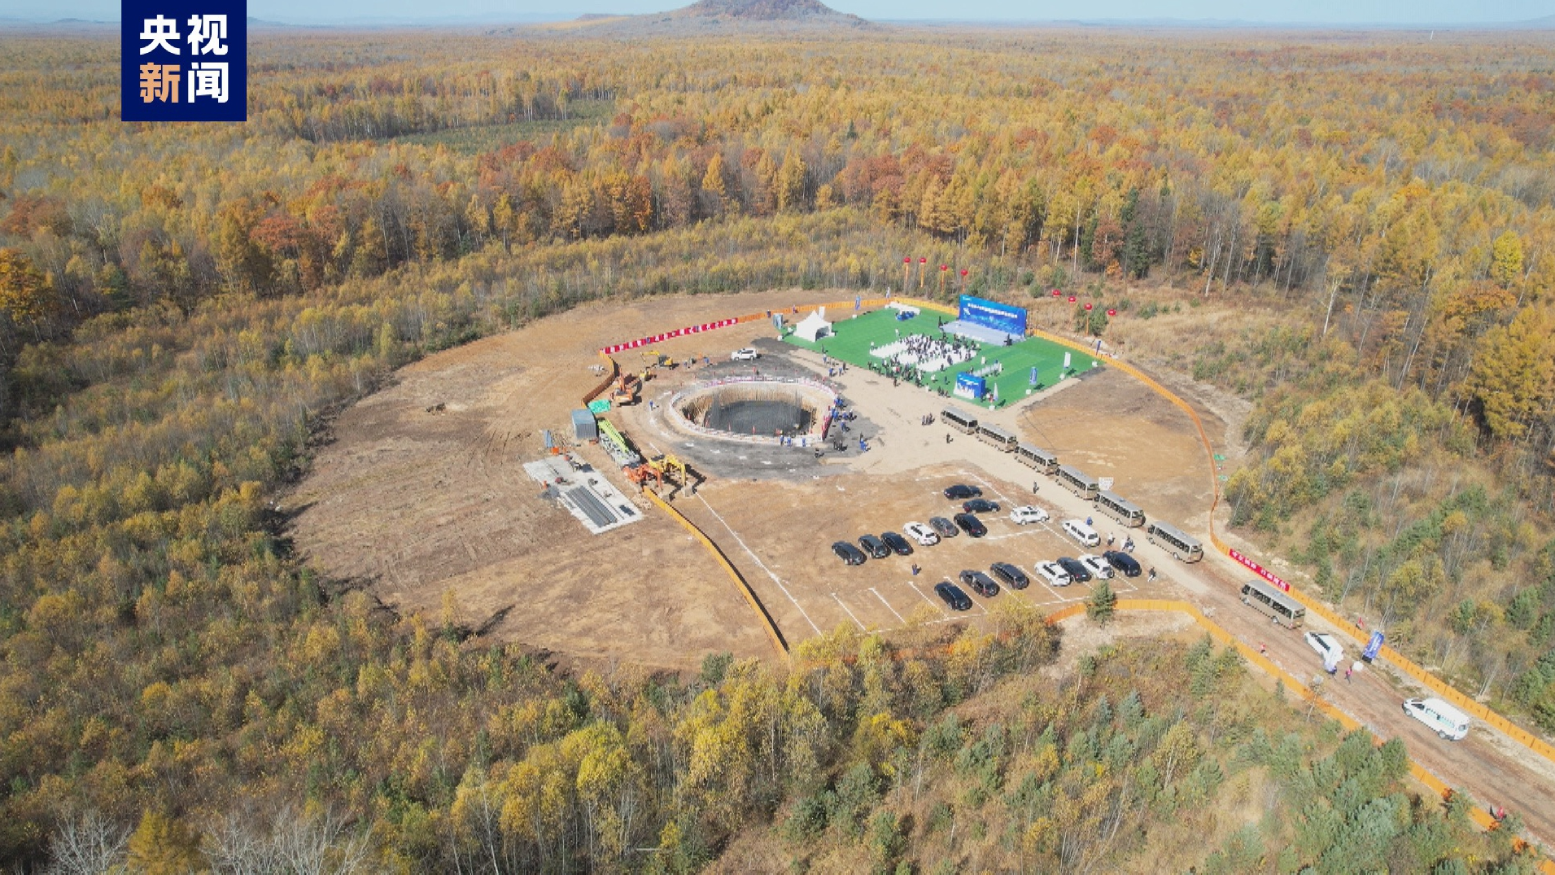 The construction site of the telescope pictured on October 11th via CGTN/CMG.